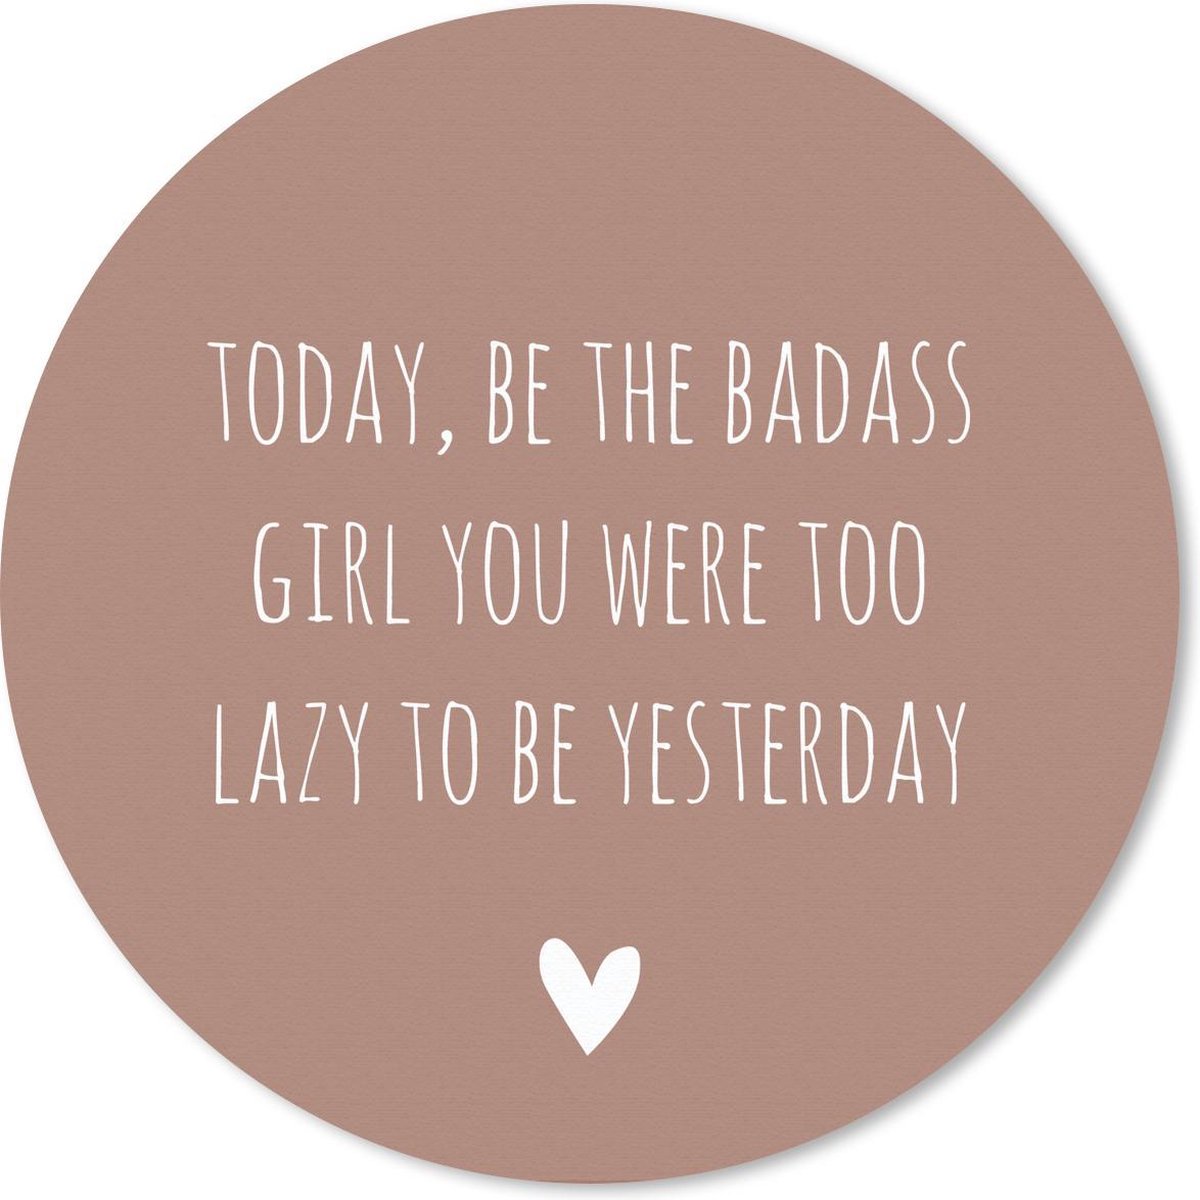 Muismat - Mousepad - Rond - Engelse quote Today, be the badass you were to lazy to be yesterday voor een bruine achtergrond - 50x50 cm - Ronde muismat